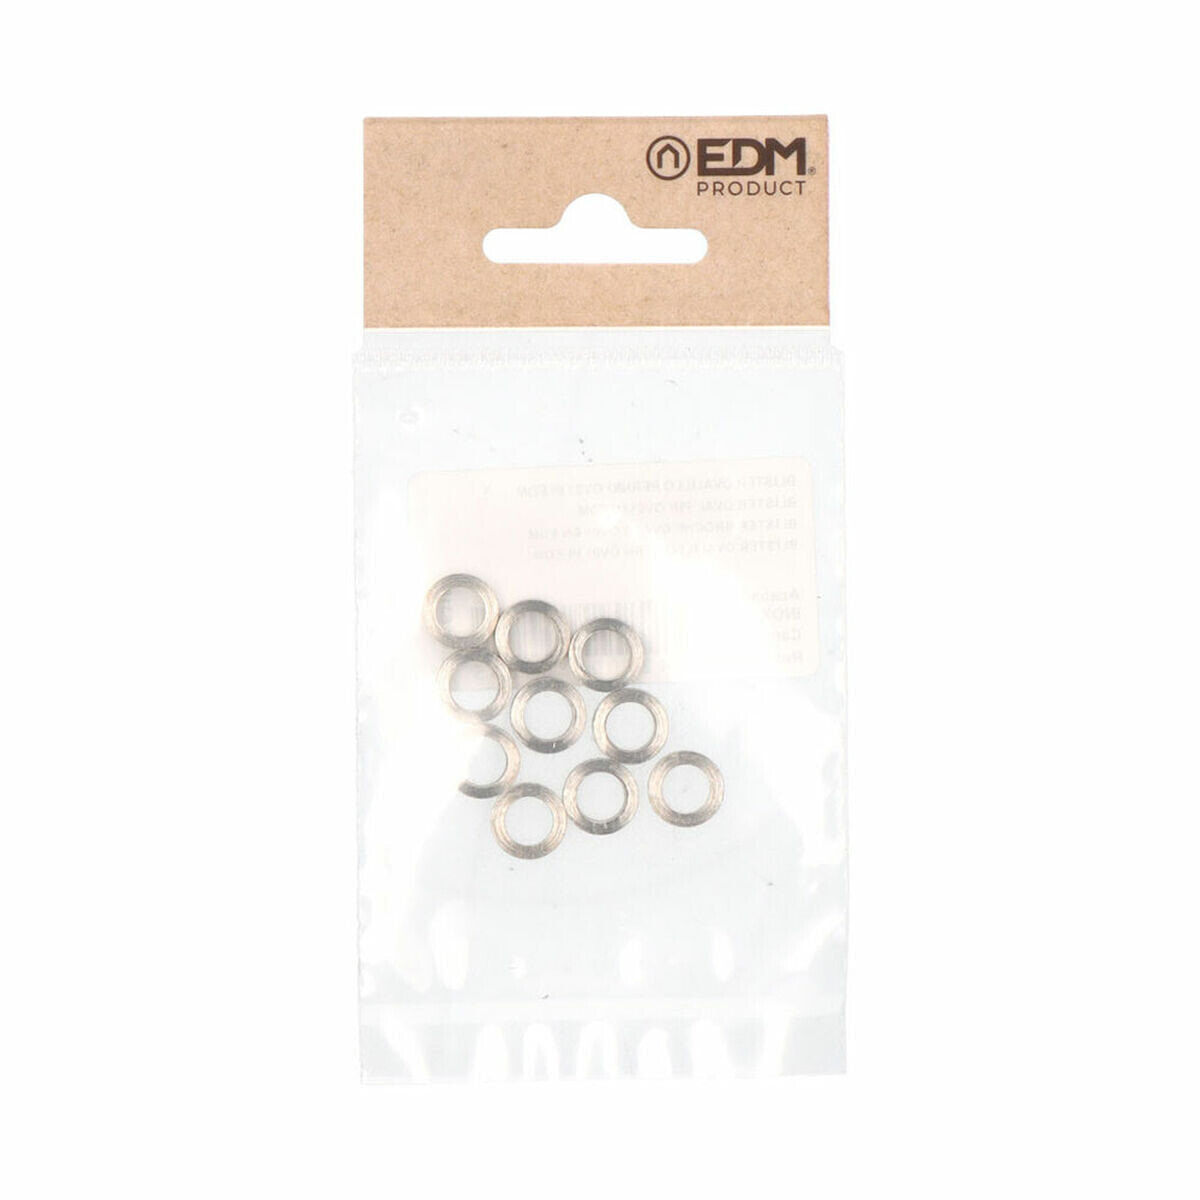 Washers EDM OV01 Oval Hinges Stainless steel Ø 10,5 mm